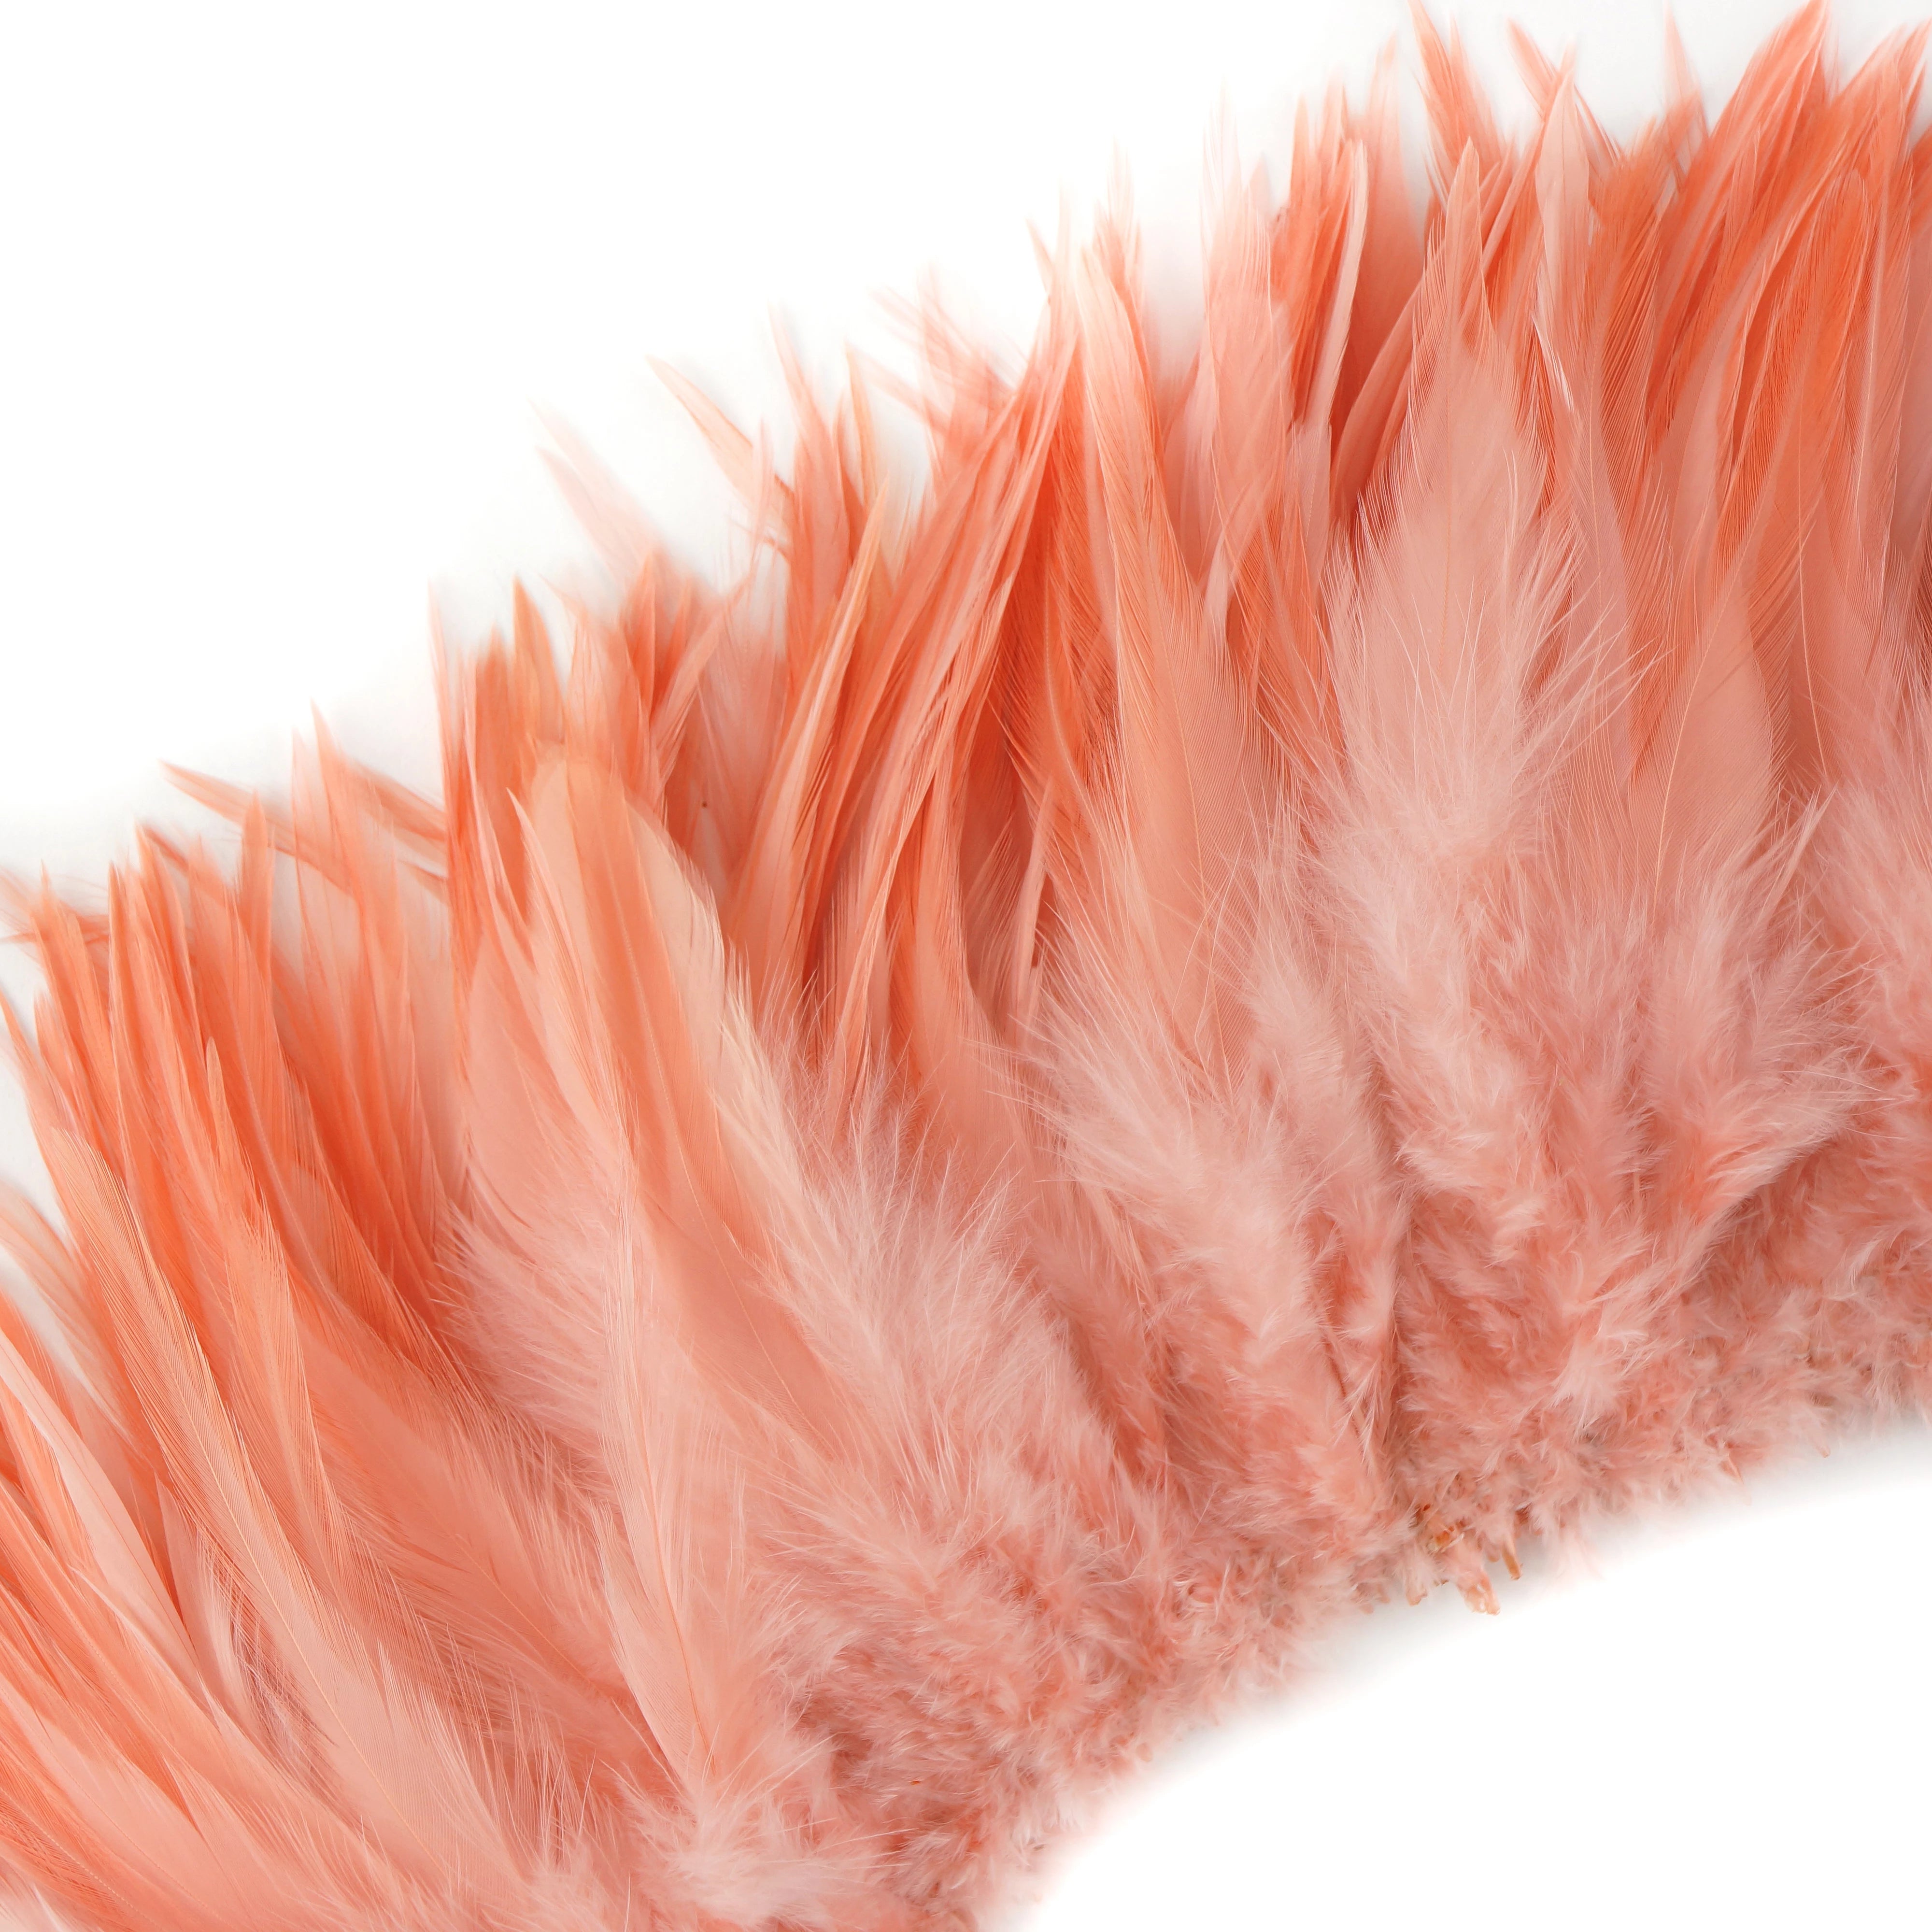 Rooster Feathers, 4-6” Candy Pink Rooster Badger Saddle Strung Craft Feathers